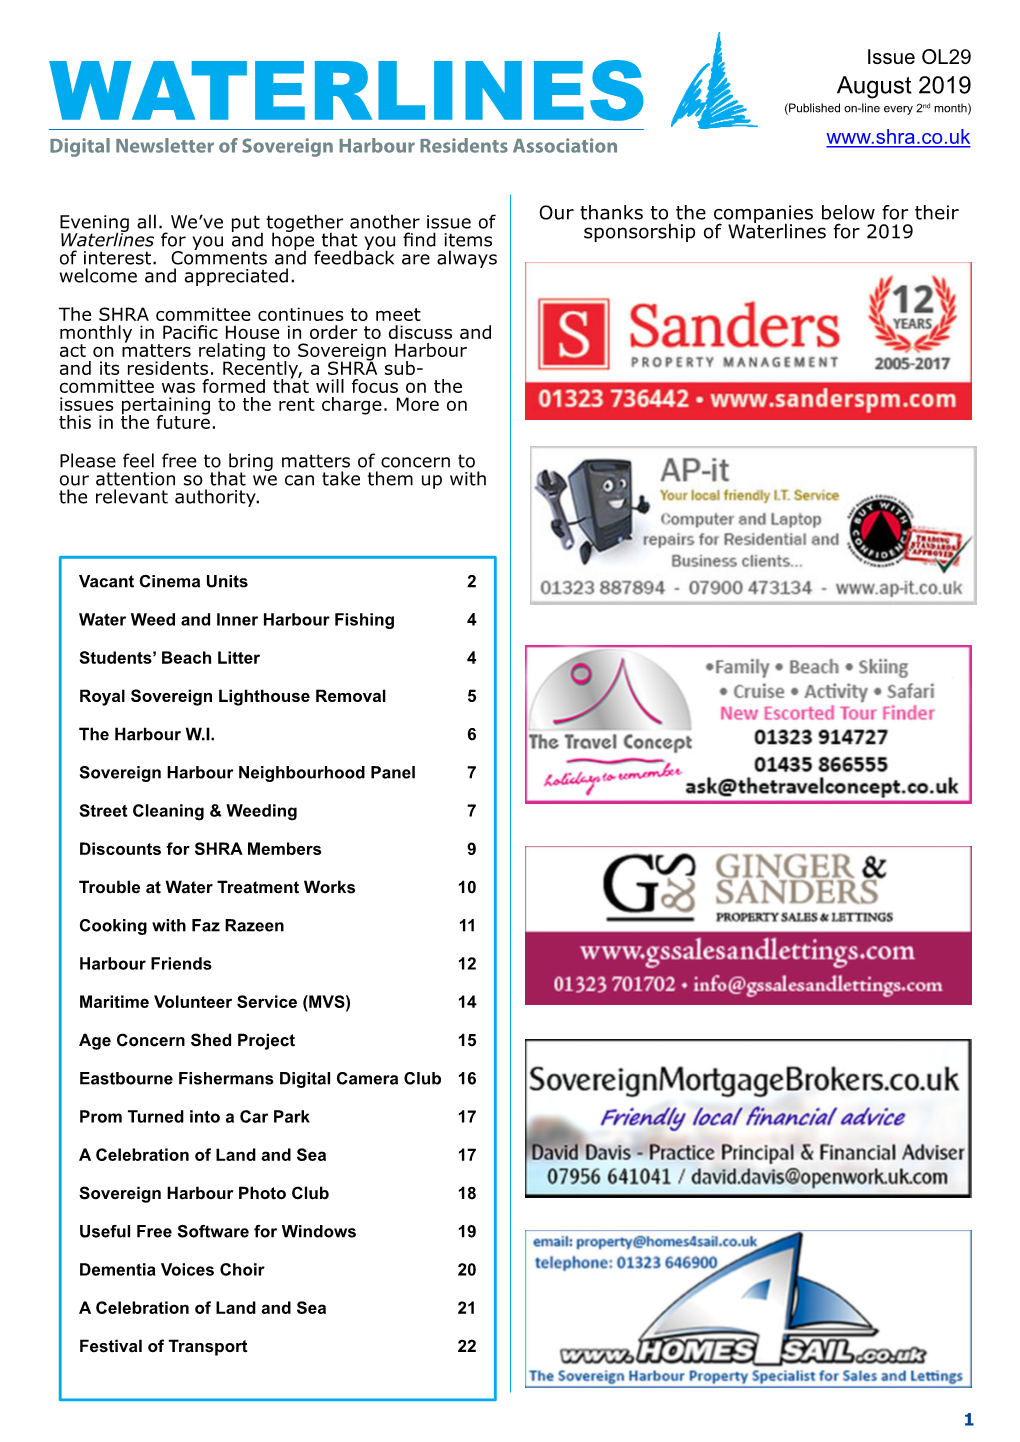 WATERLINES (Published On-Line Every 2Nd Month) Digital Newsletter of Sovereign Harbour Residents Association